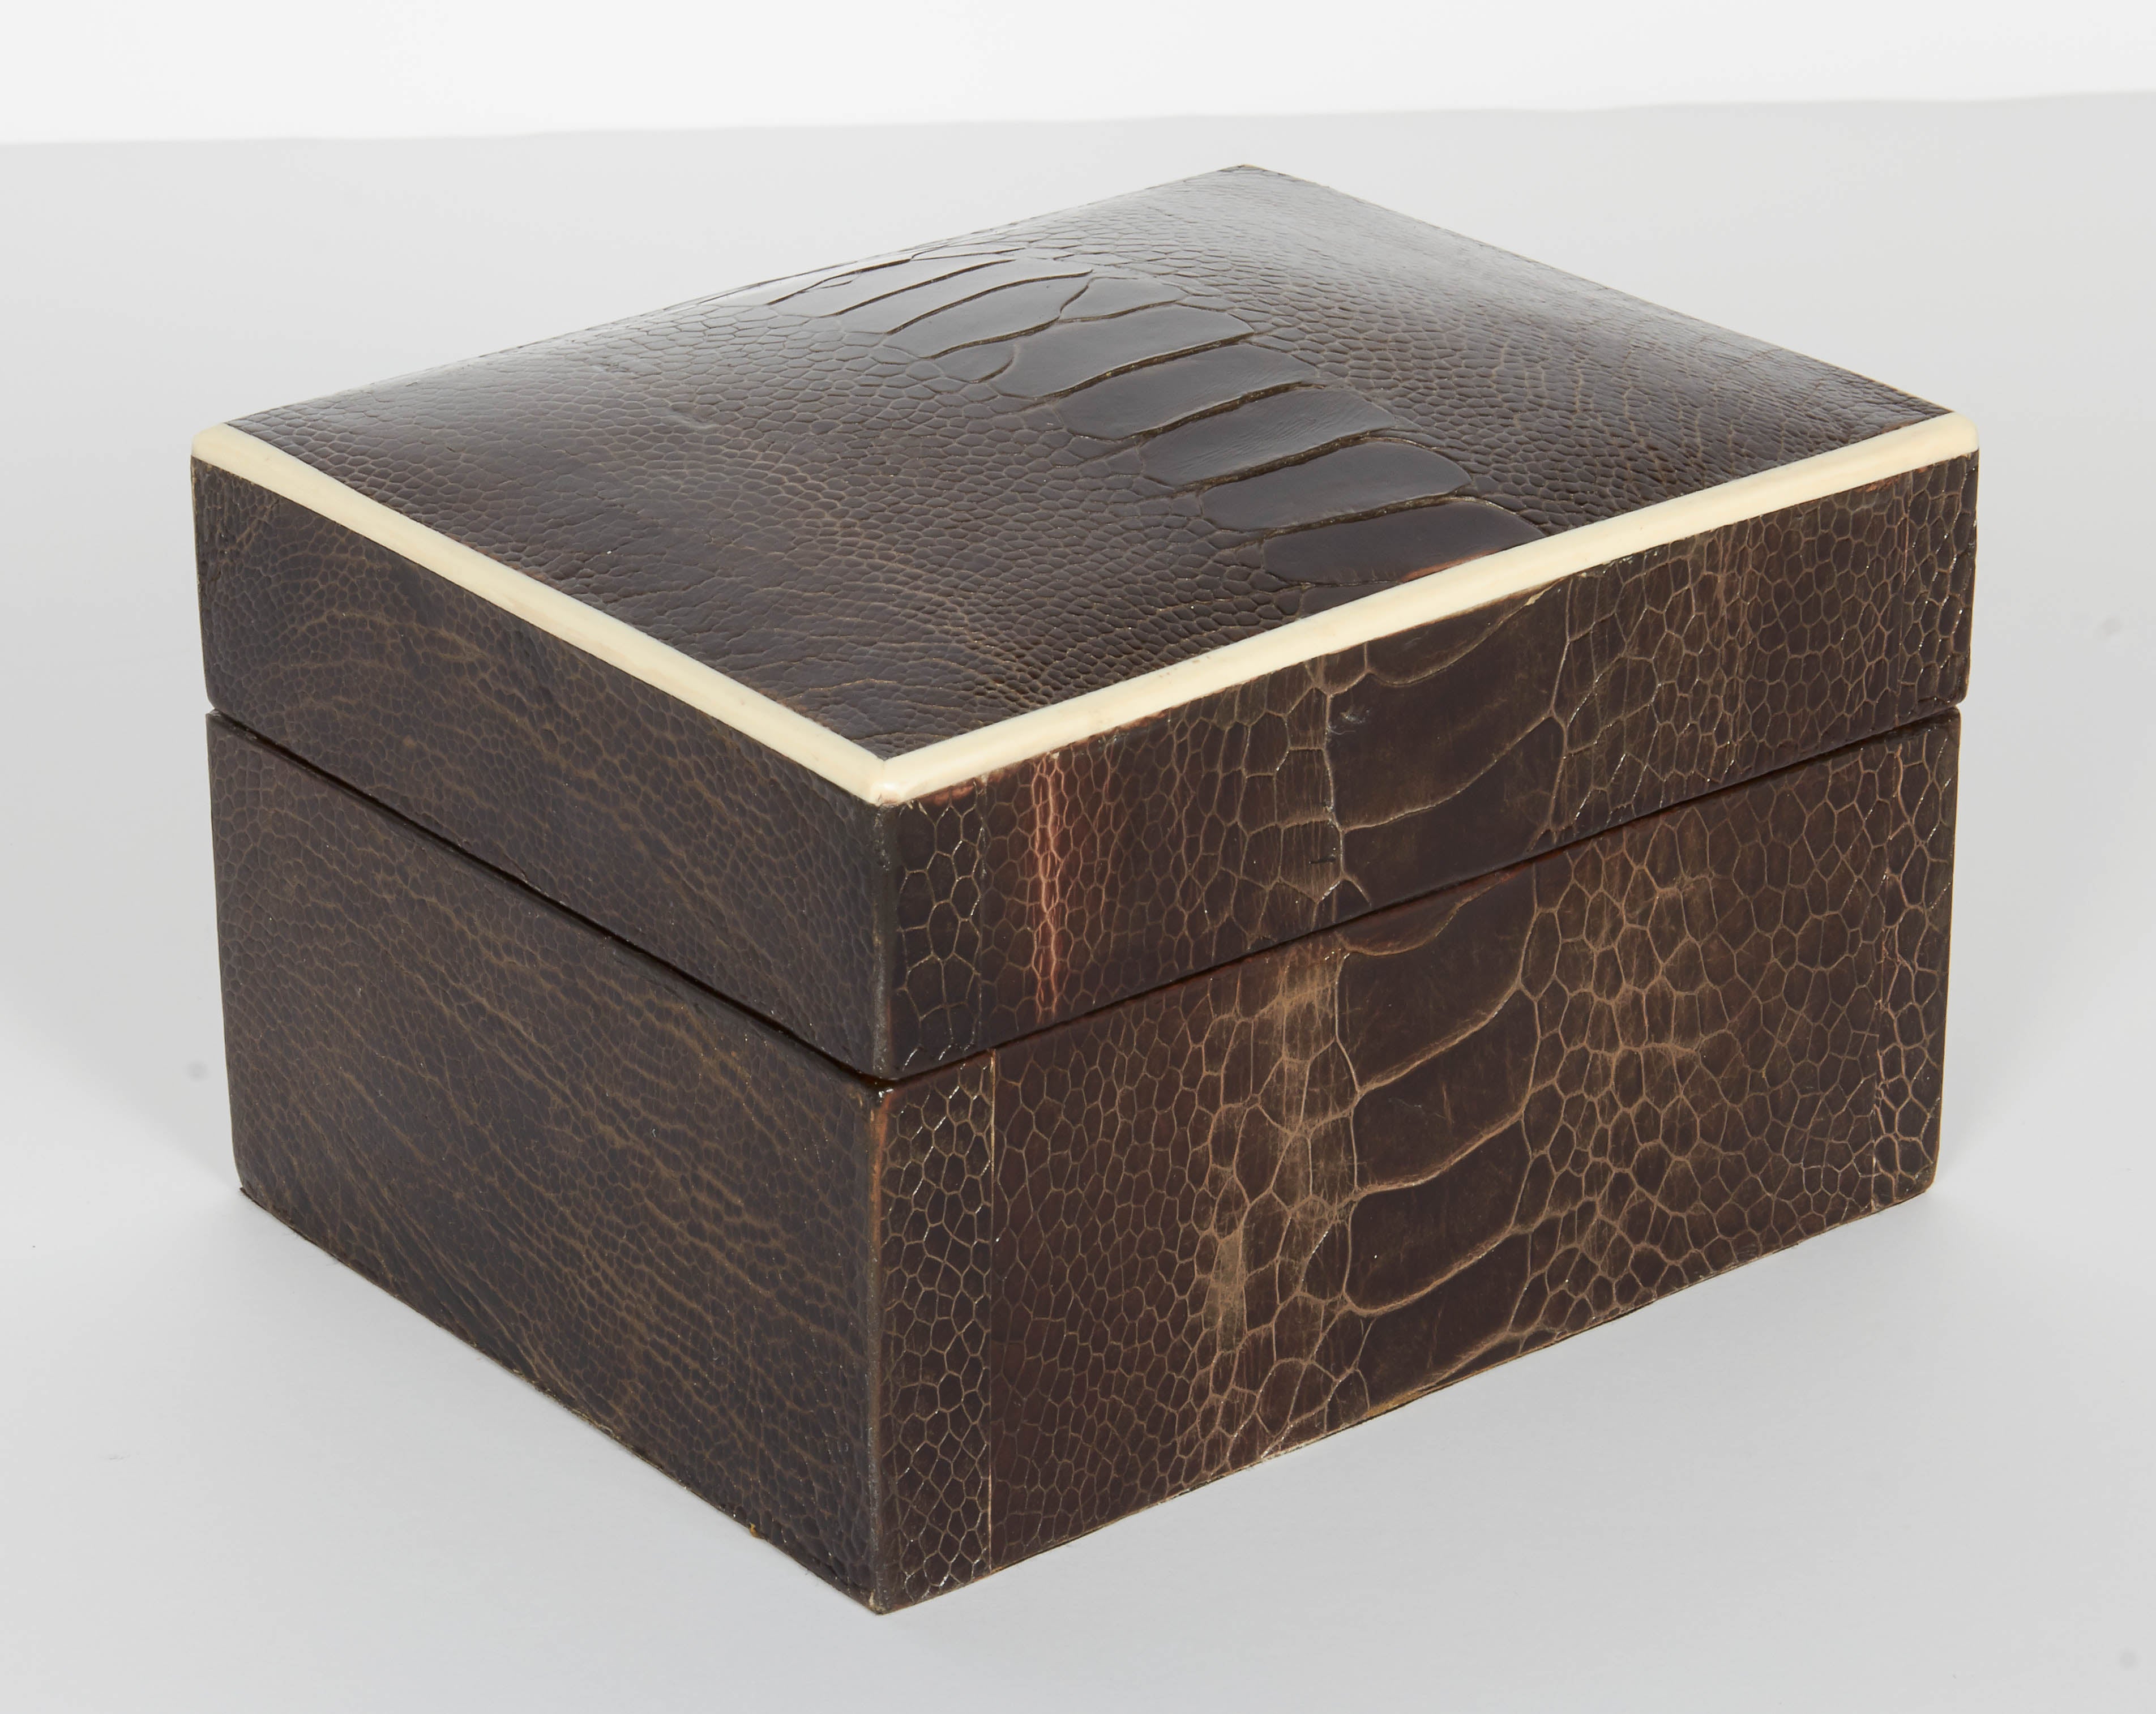 Pair of Exotic Ostrich Leather Decorative Boxes with Bone Inlay ‘Black/Espresso’ 2